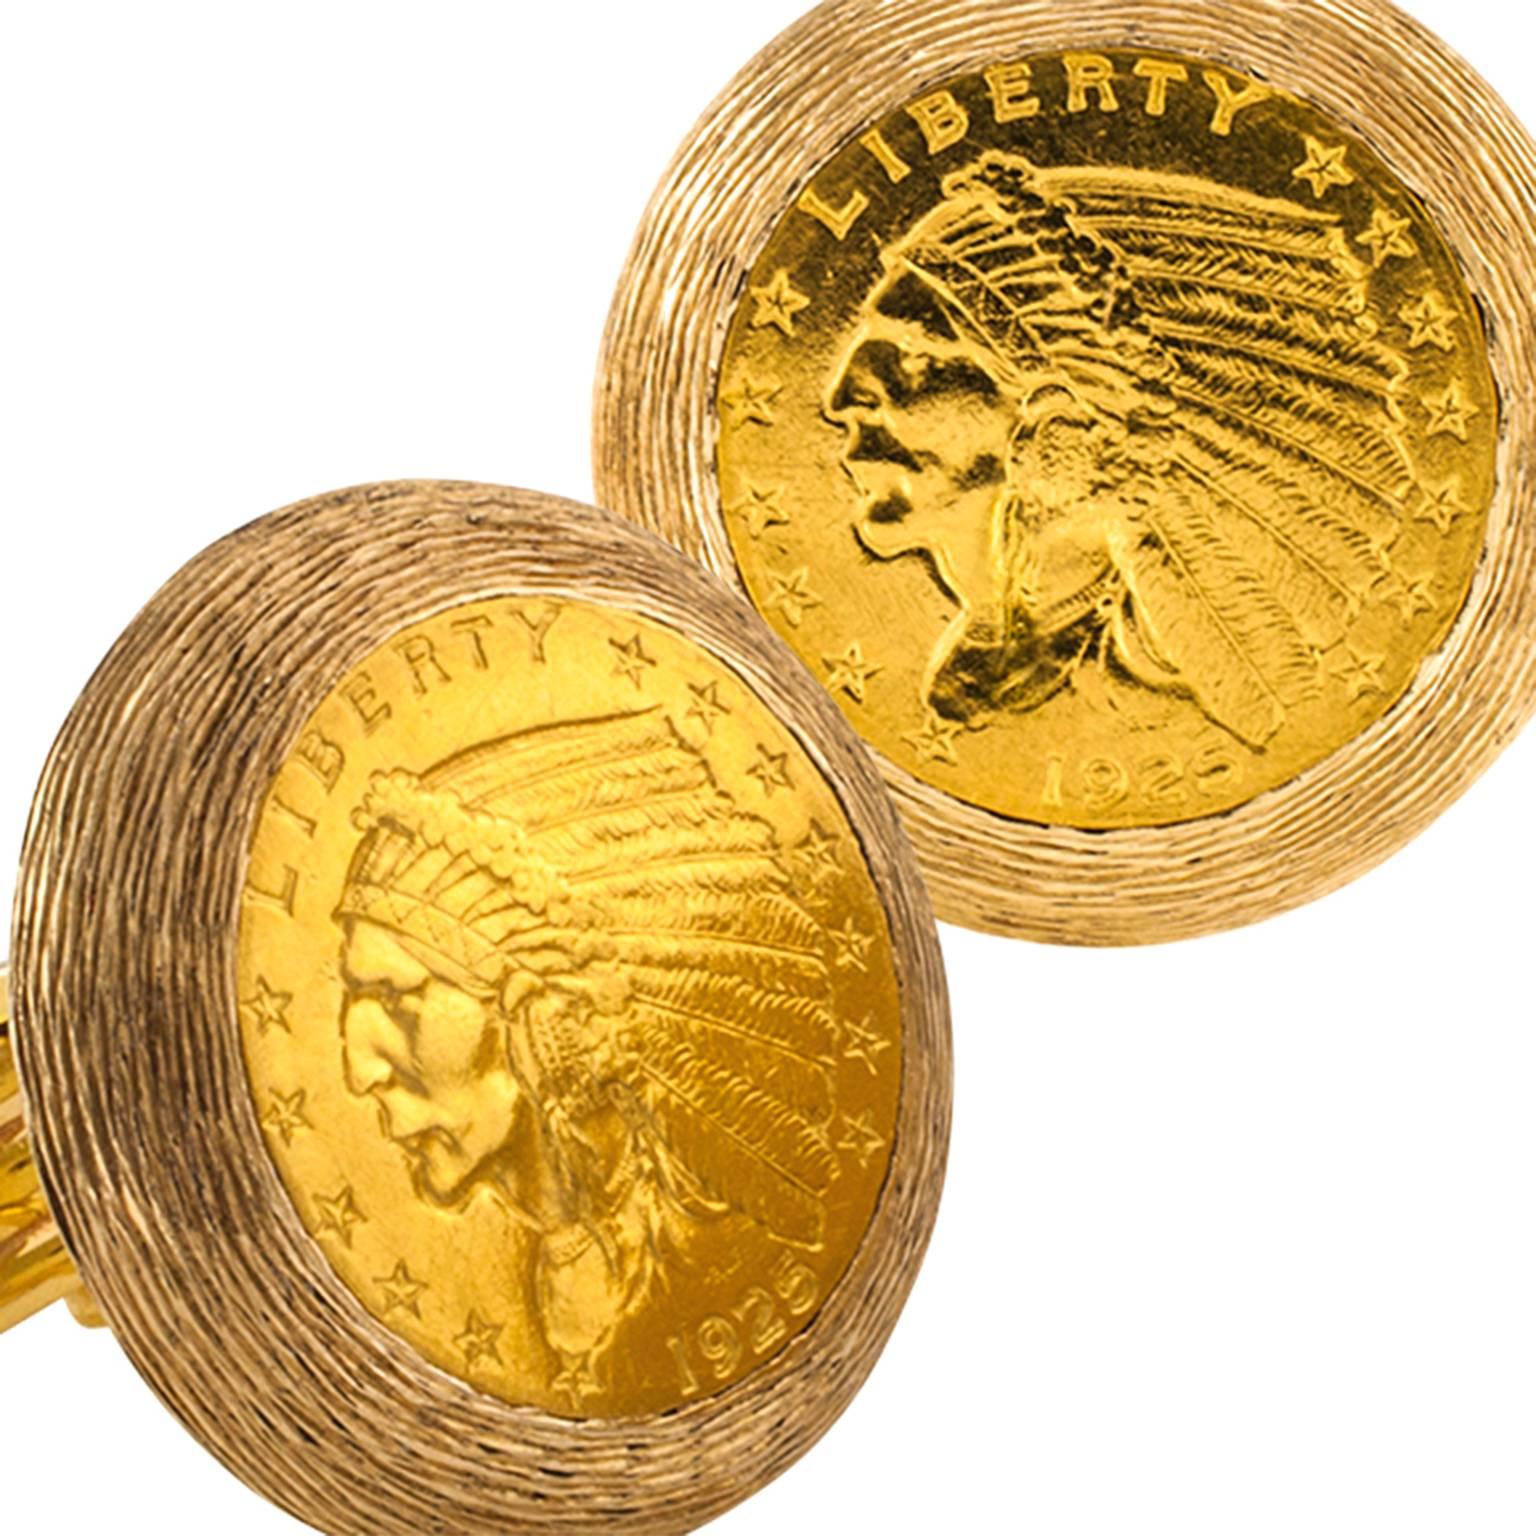 US $2.50 Indian Head Gold Coin Cuff Links
 An unusual pairing of 1925 Indian Head US $2.50 gold coins that are most definitely going to add an elegant and sartorial touch.  Mounted in 14 karat yellow gold with Florentine bezels and fluted,